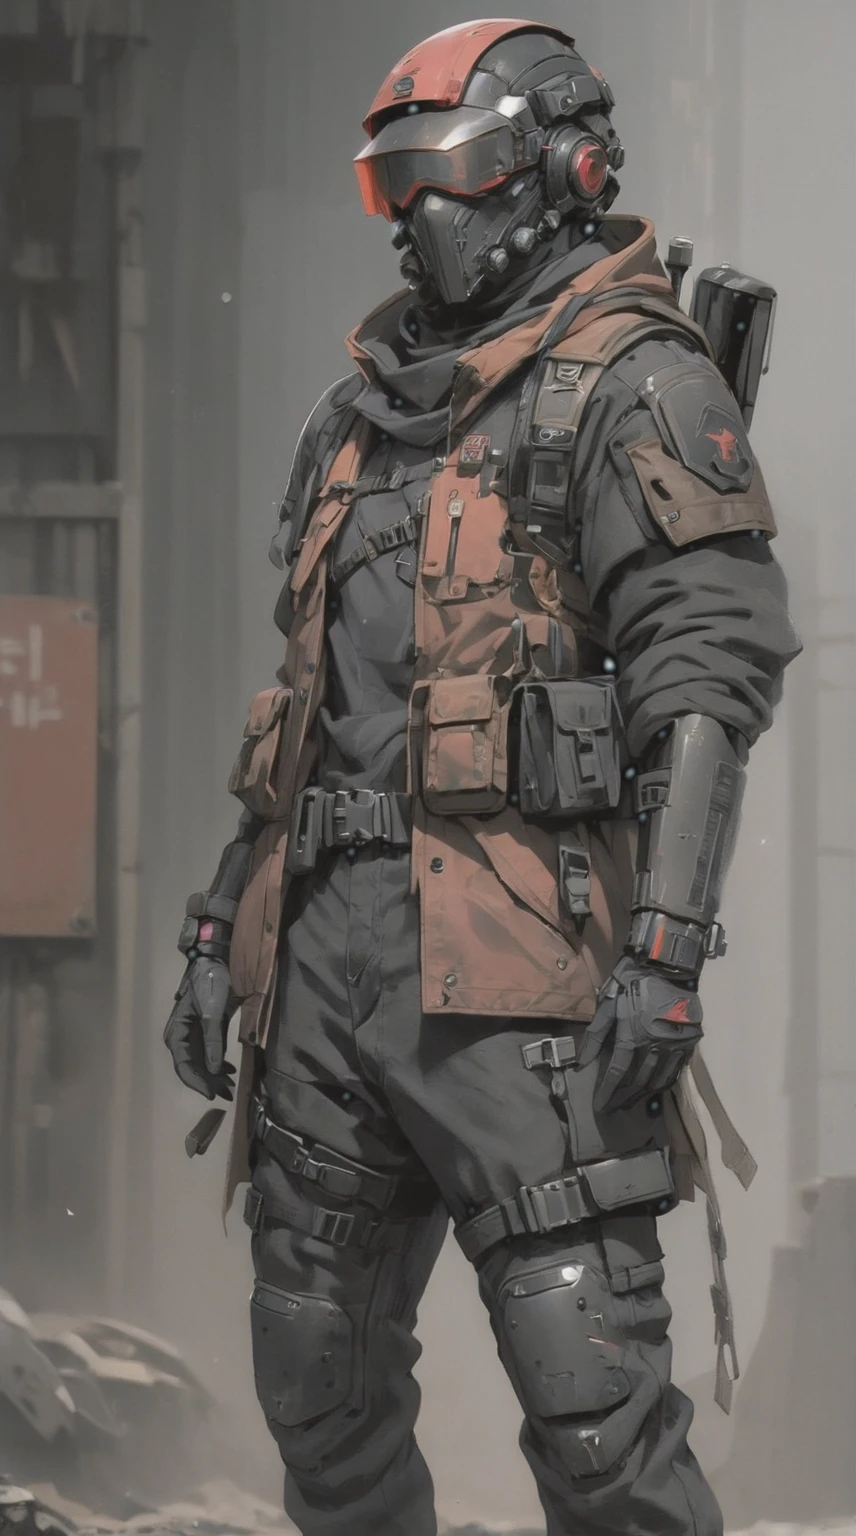 Male sci-fi soldier, post apocalytpic. Weathered clothing: sci-fi black helmet, red visor, brown duster coat, black tactical vest, black pants, tactical gear, faceless, hidden face